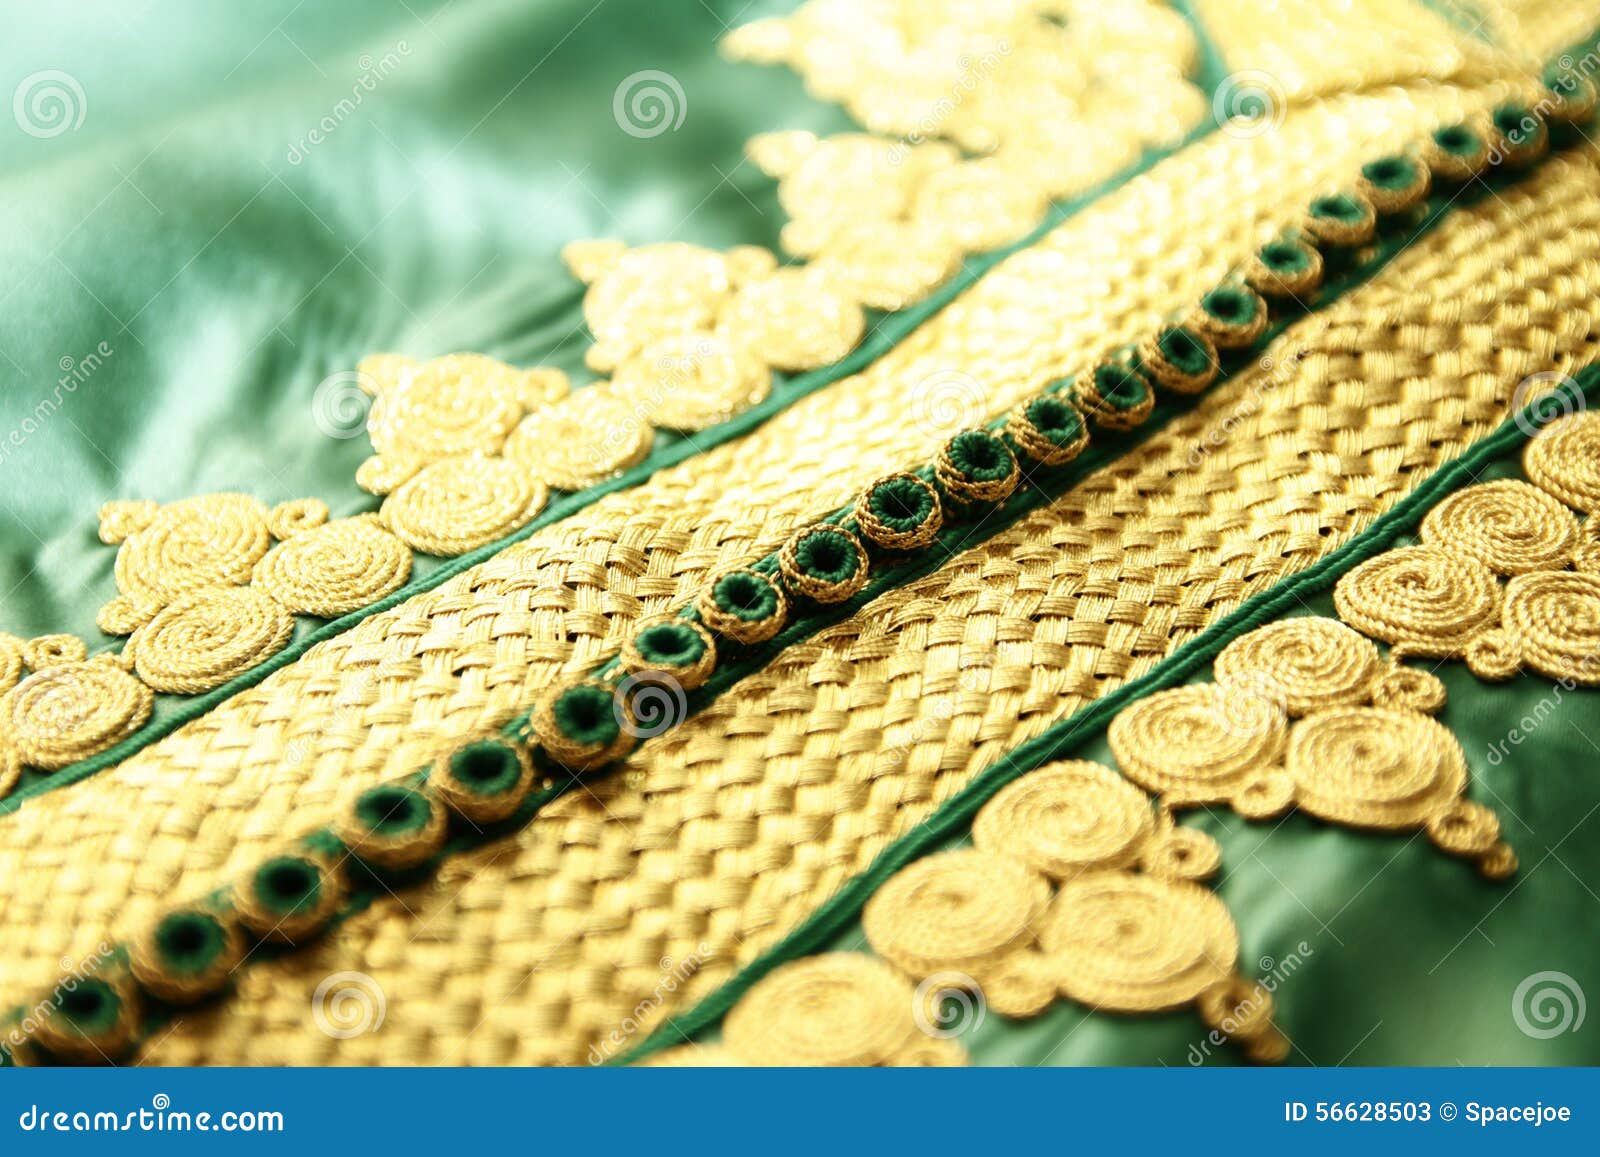 details of a green moroccan caftan